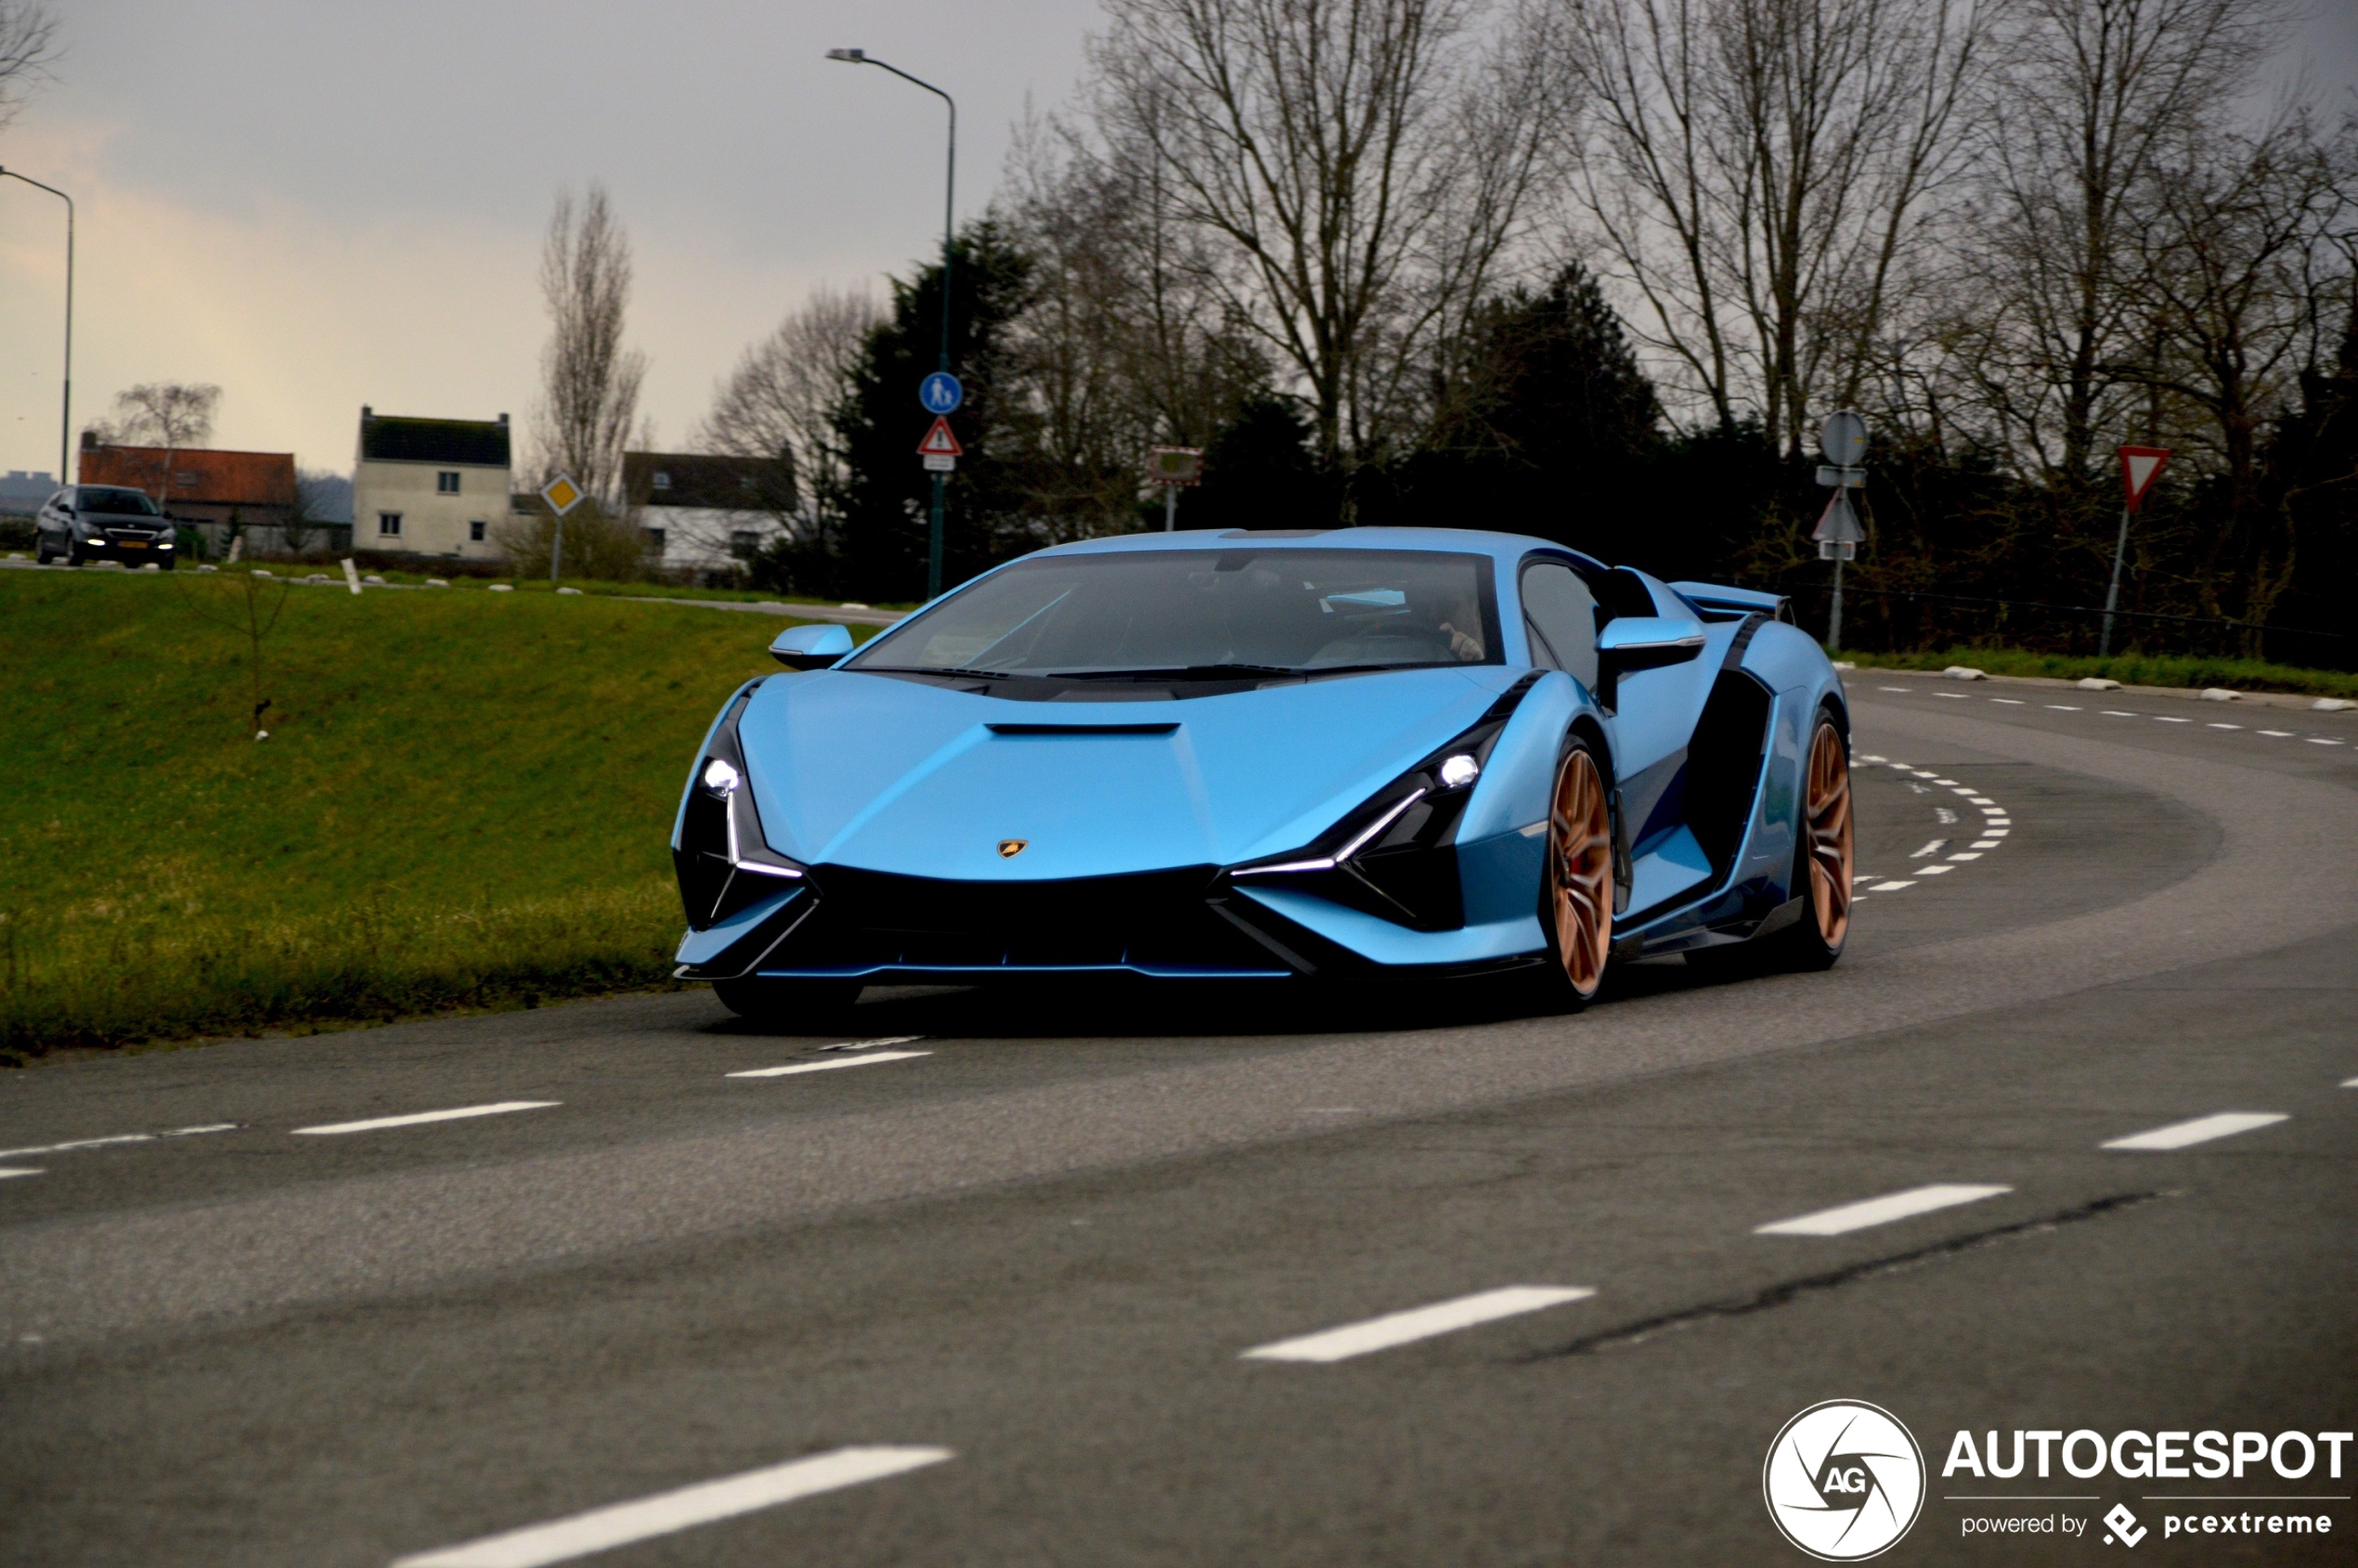 Absurd Lamborghini Sián FKP 37 arrived in the Netherlands